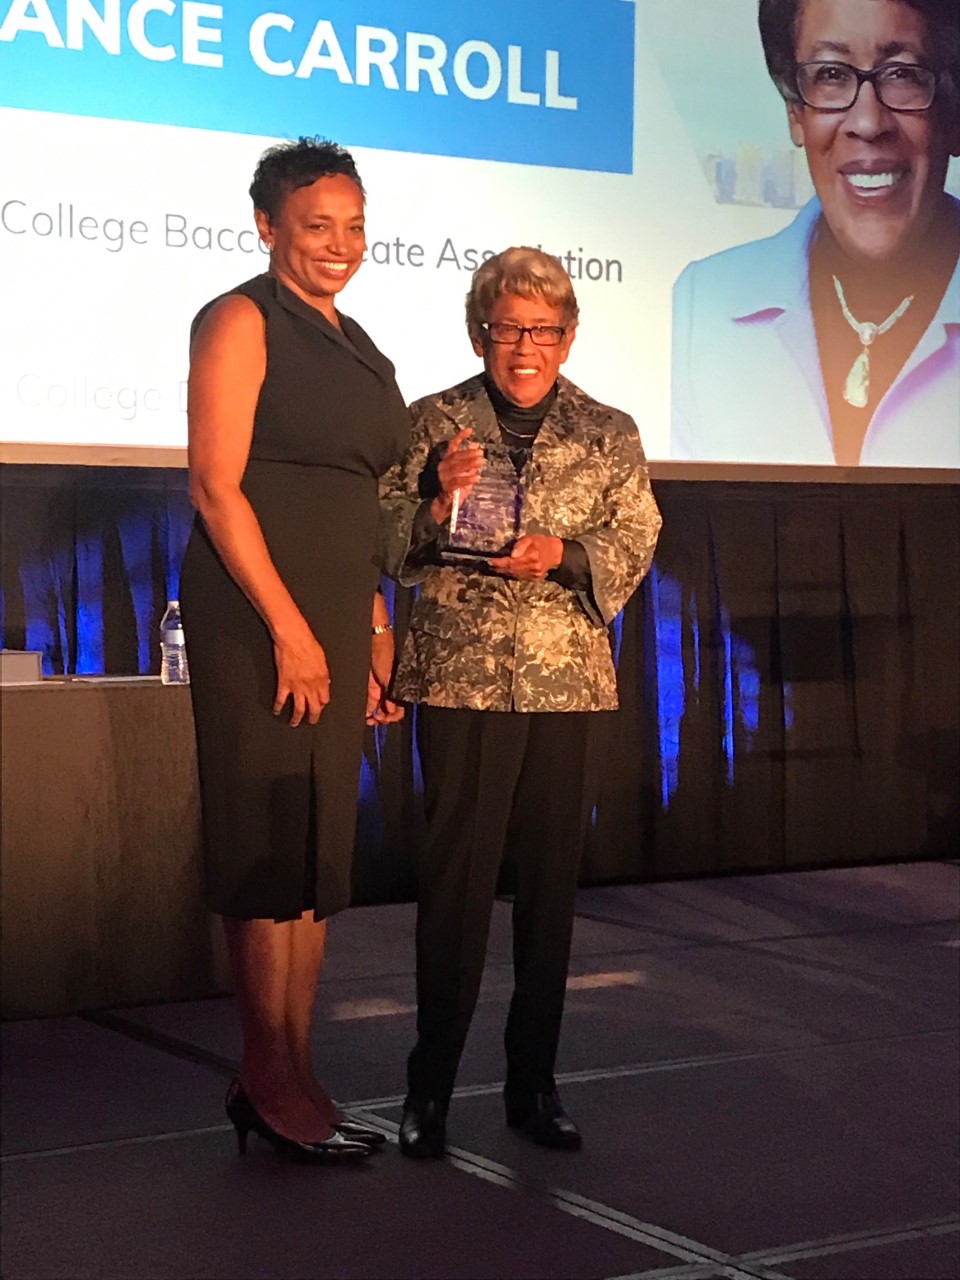 Dr. Constance M. Carroll, right, on stage with her award